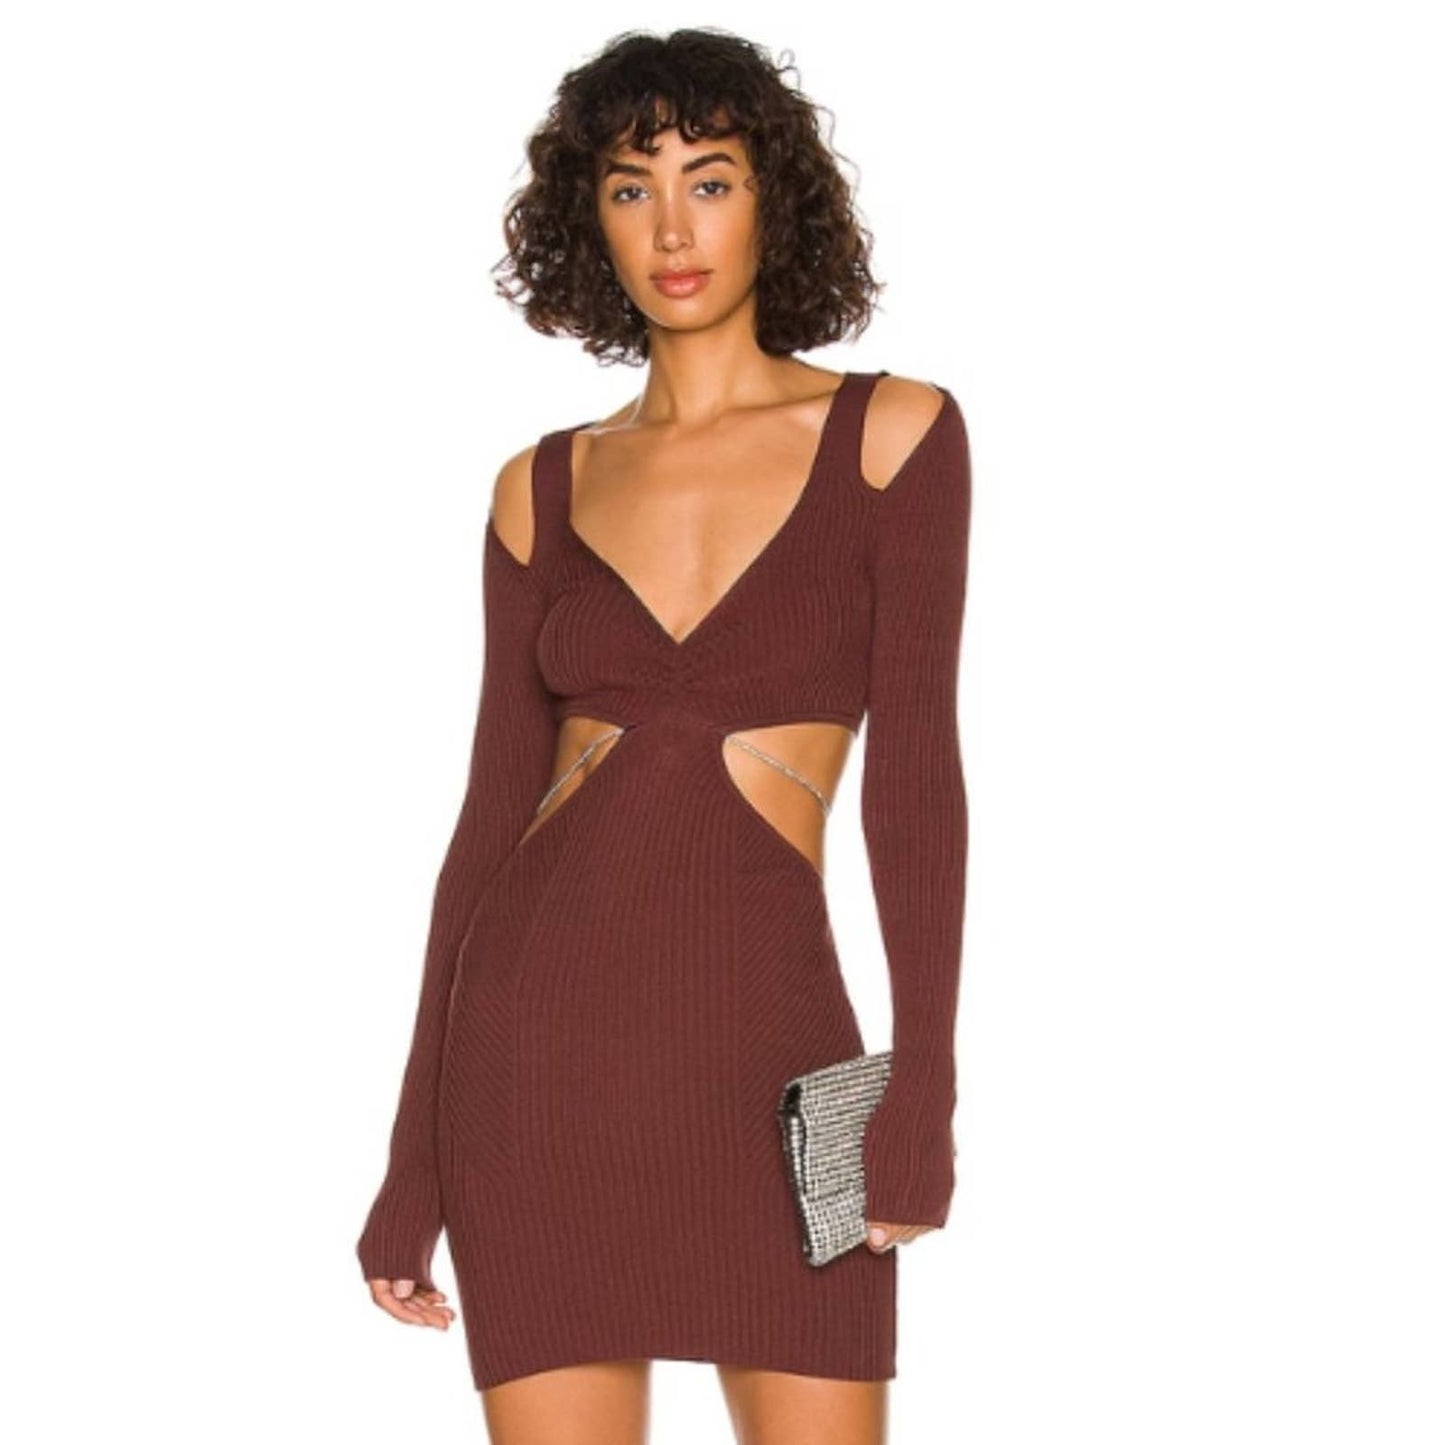 h:ours Caeden Knit Dress with Chain in Chocolate NWOT Size Medium